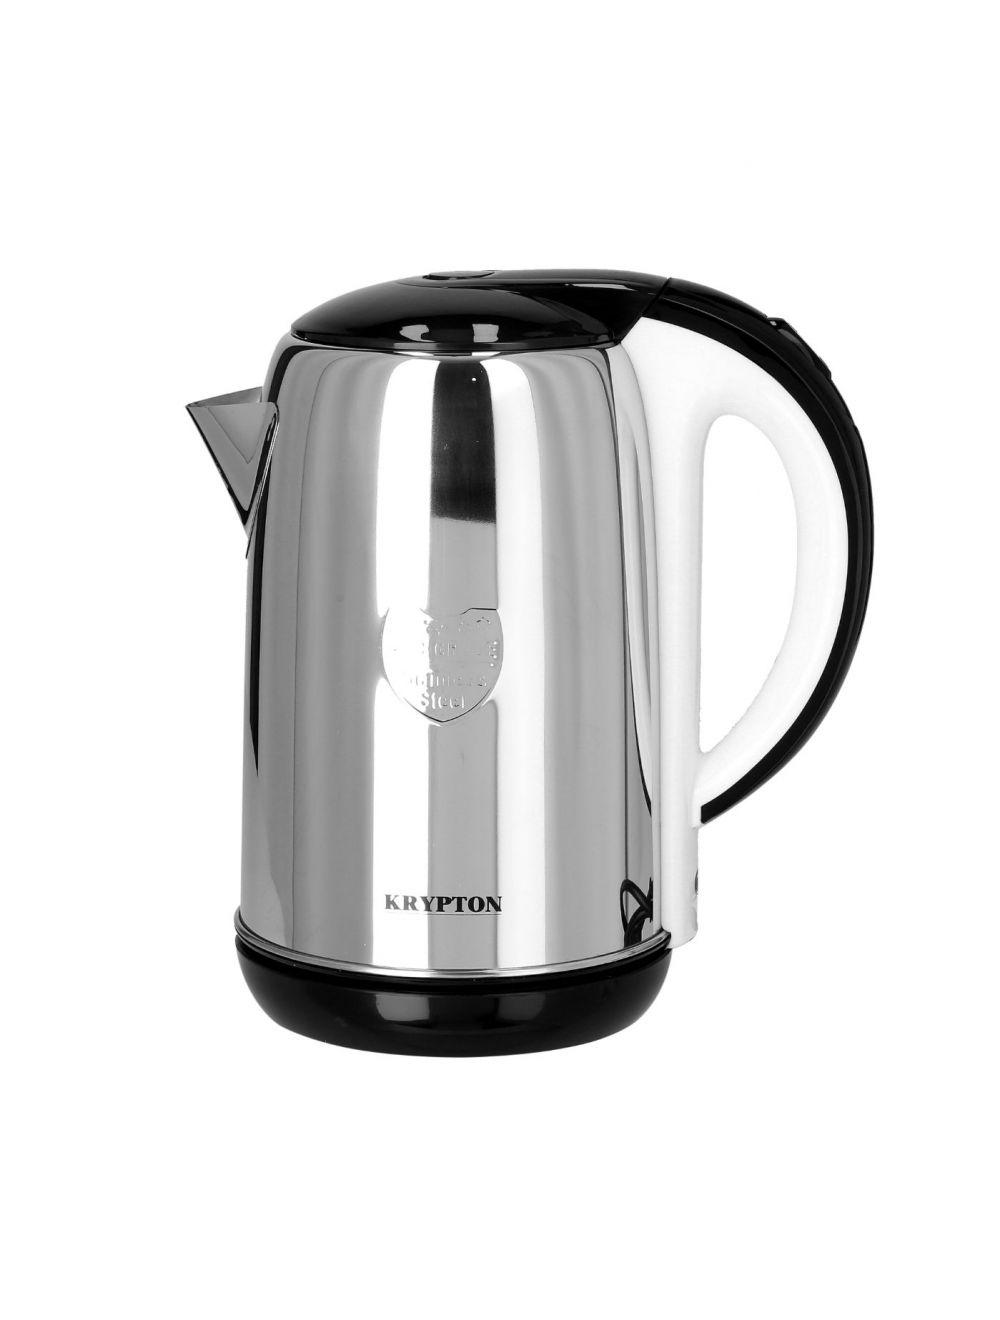 Krypton 2.2L Electric Kettles Cordless Fast Boil for General Use-KNK6127